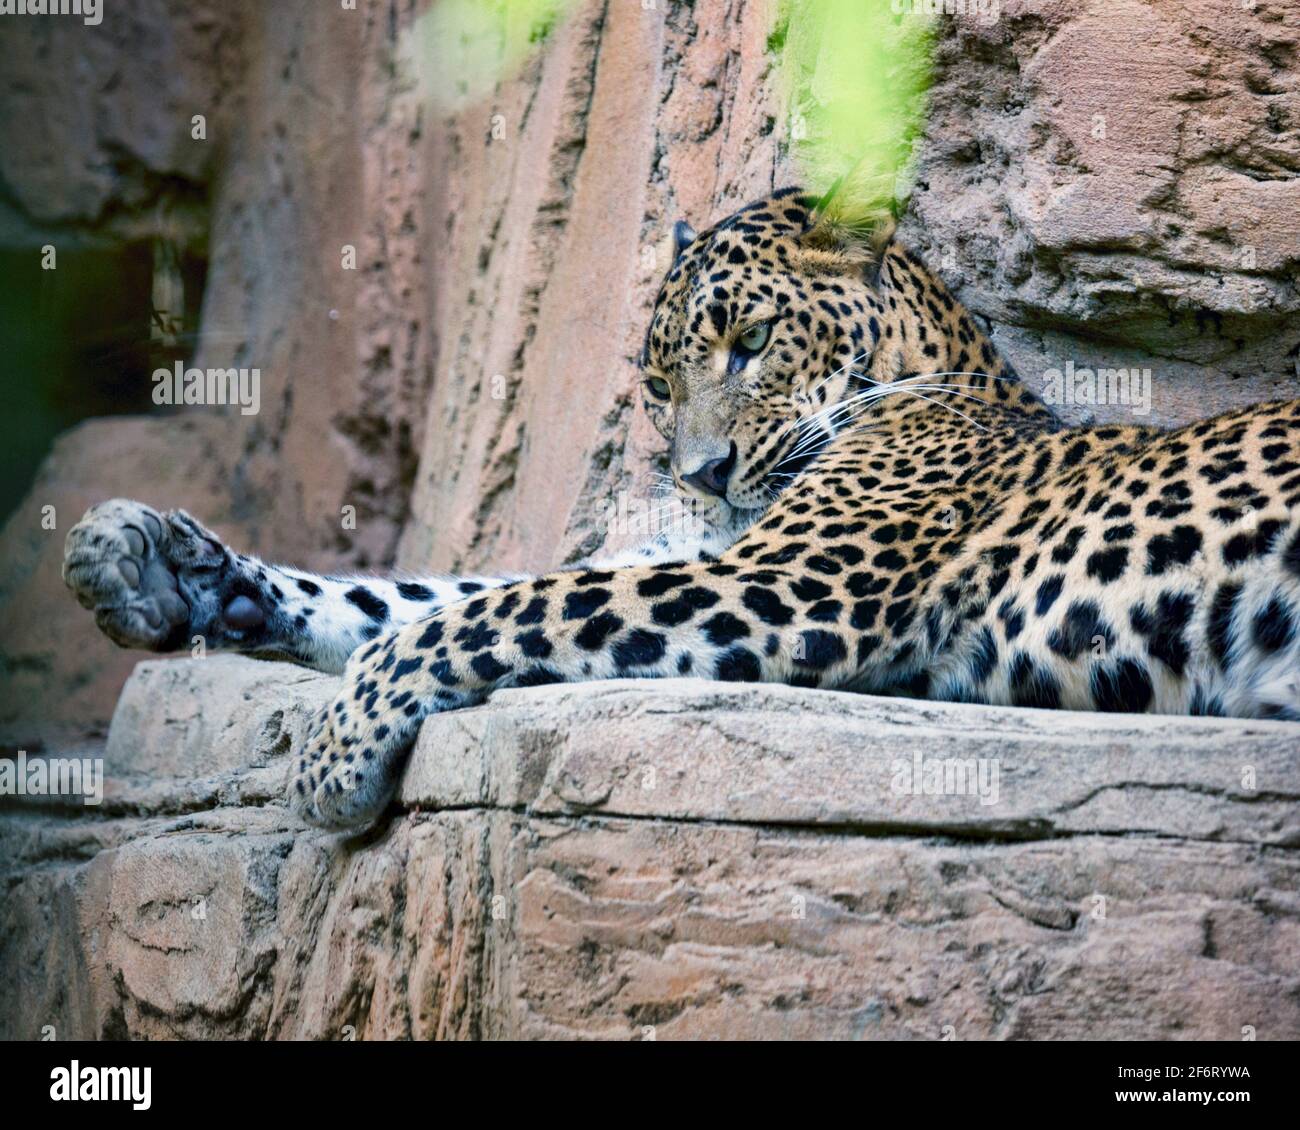 Fuengirola, Costa del Sol, Malaga Province, Andalusia, southern Spain. Leopard, (Panthera pardus). Photographed in captivity in Fuengirola Bioparc.. Stock Photo